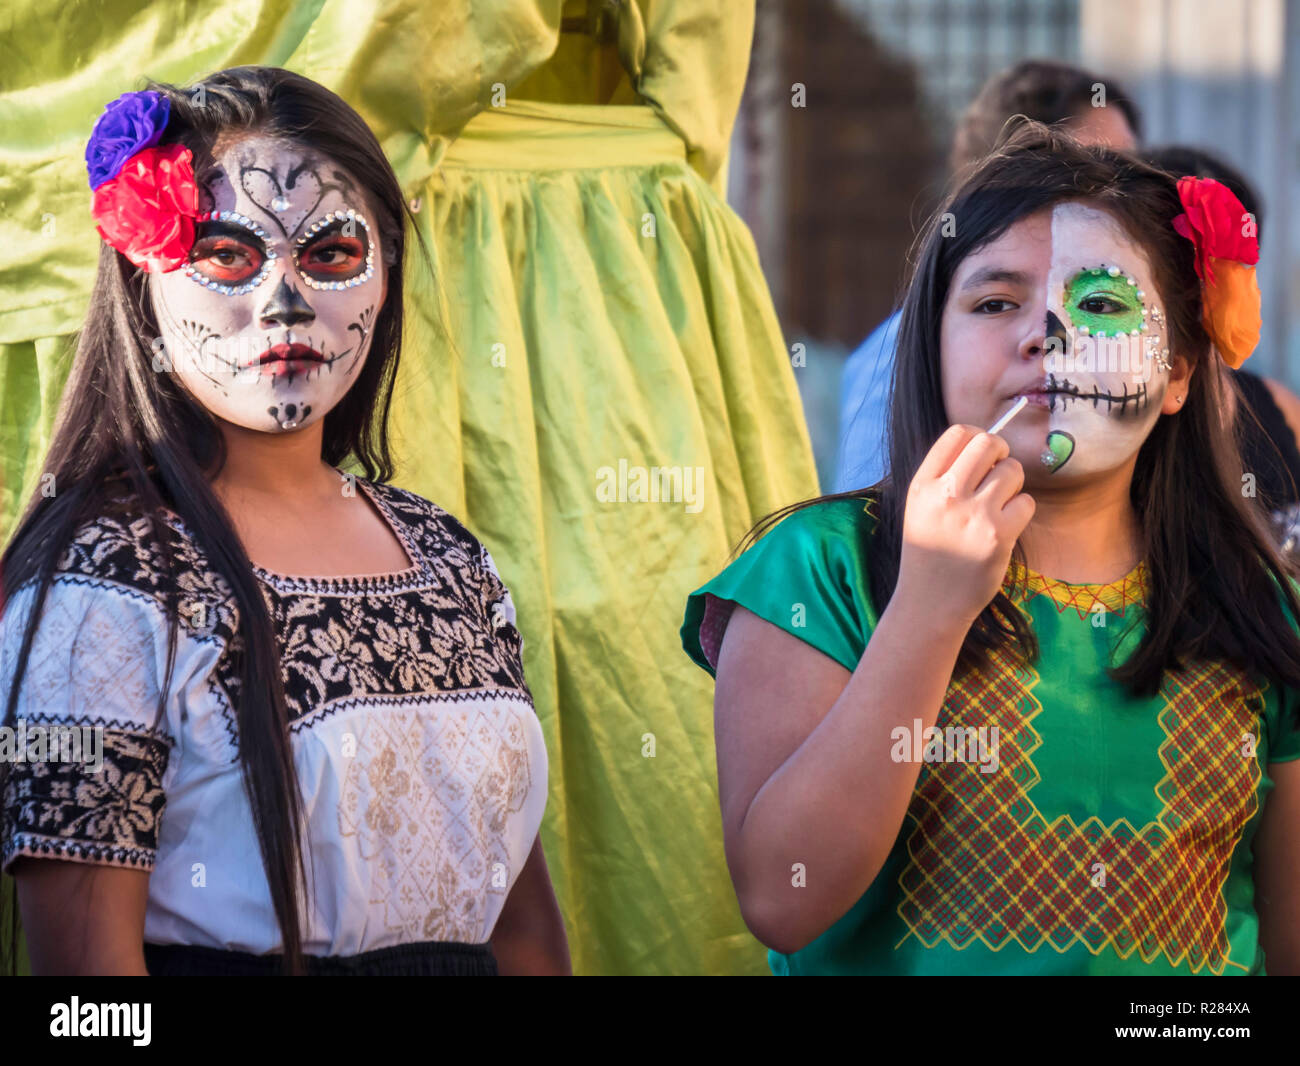 Oaxaca, Mexico - Oct 24 2018: young women with skull make up to celebrate the Day of the Dead Dias de los Muertos in Mexico Stock Photo